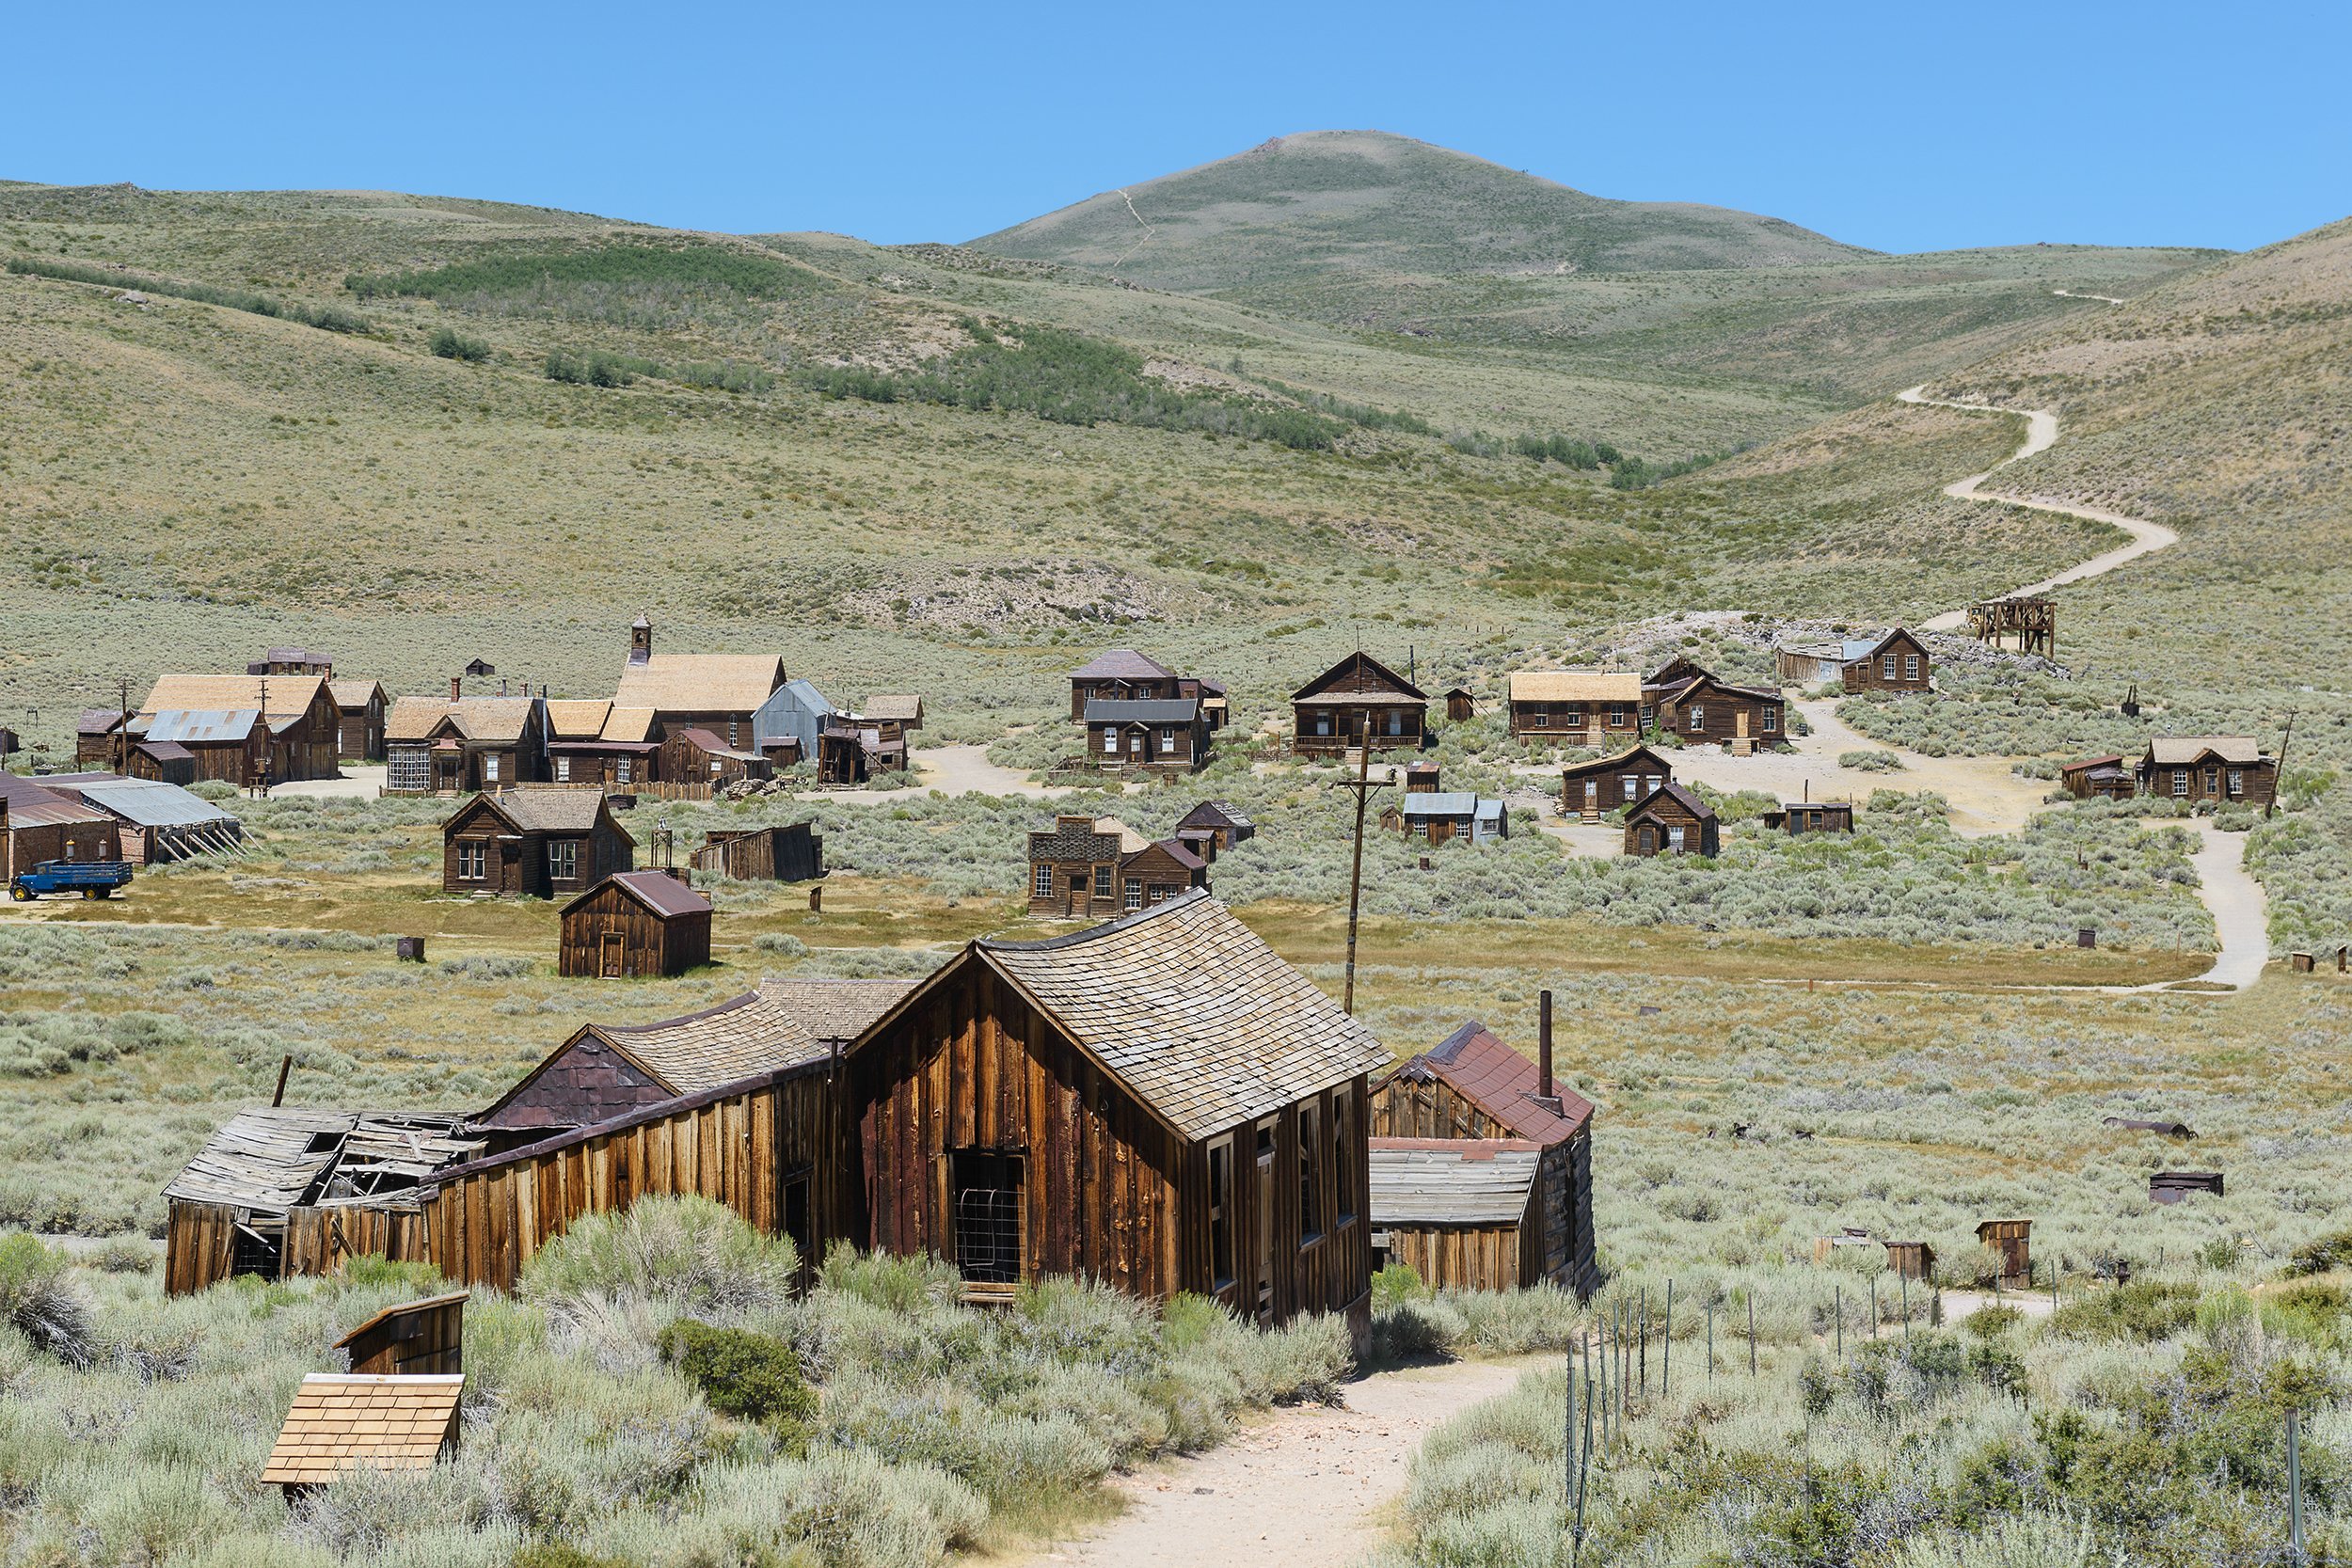 <p>For a glimpse into California's Gold Rush past, look no farther than the ghost town of Bodie east of the Sierra Nevadas, maintained as a historic park in a state of "arrested decay" with even building interiors still stocked with goods. One of the <a href="https://blog.cheapism.com/best-of-california-on-a-budget-15768/">Golden State's budget-travel gems</a>, the once-booming mining town <a href="http://www.parks.ca.gov/?page_id=509">costs only $8 to visit</a> and is accessible only by a 13-mile dirt road, with lodging available in nearby Bridgeport. The park's historic buildings, however, are currently closed.</p><p><b>For more great travel guides and vacation tips,</b> <a href="http://cheapism.us14.list-manage.com/subscribe?u=de966e79b38e1d833d5781074&id=c14db36dd0">please sign up for our free newsletters</a>.</p>